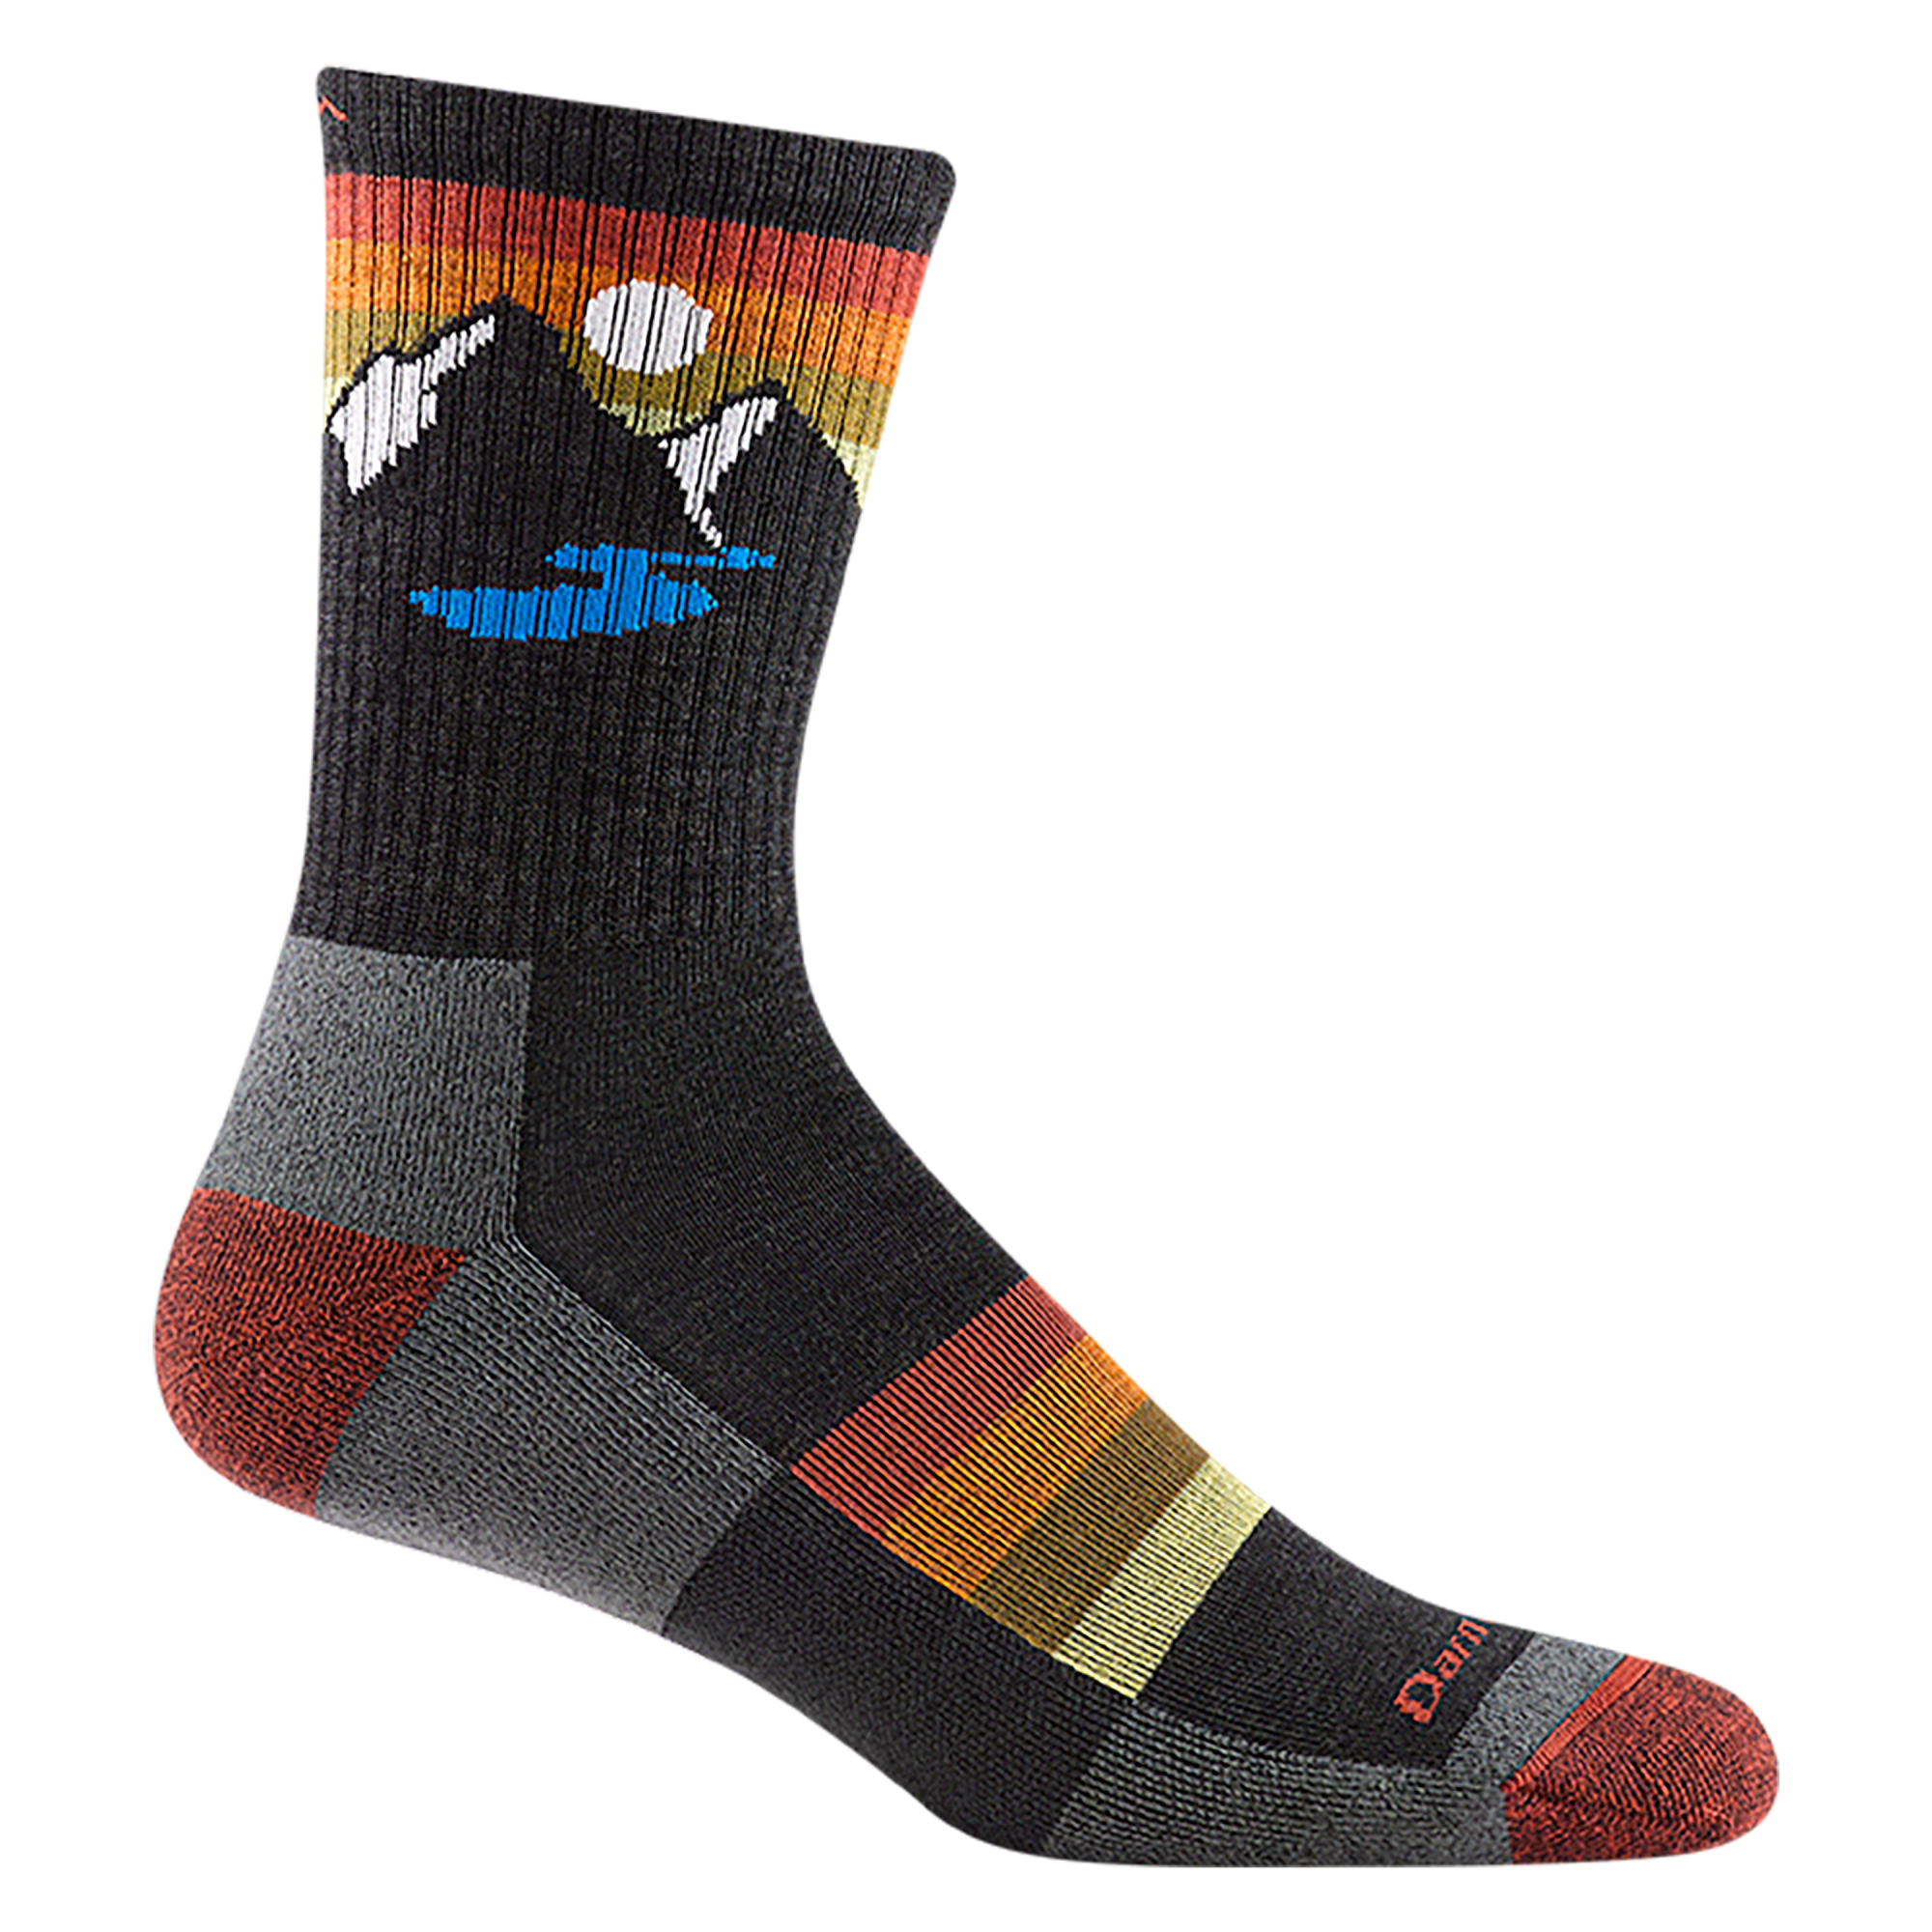 1997 men's sunset ridge micro crew hiking sock in charcoal with red accents, warm toned stripes, and mountain design